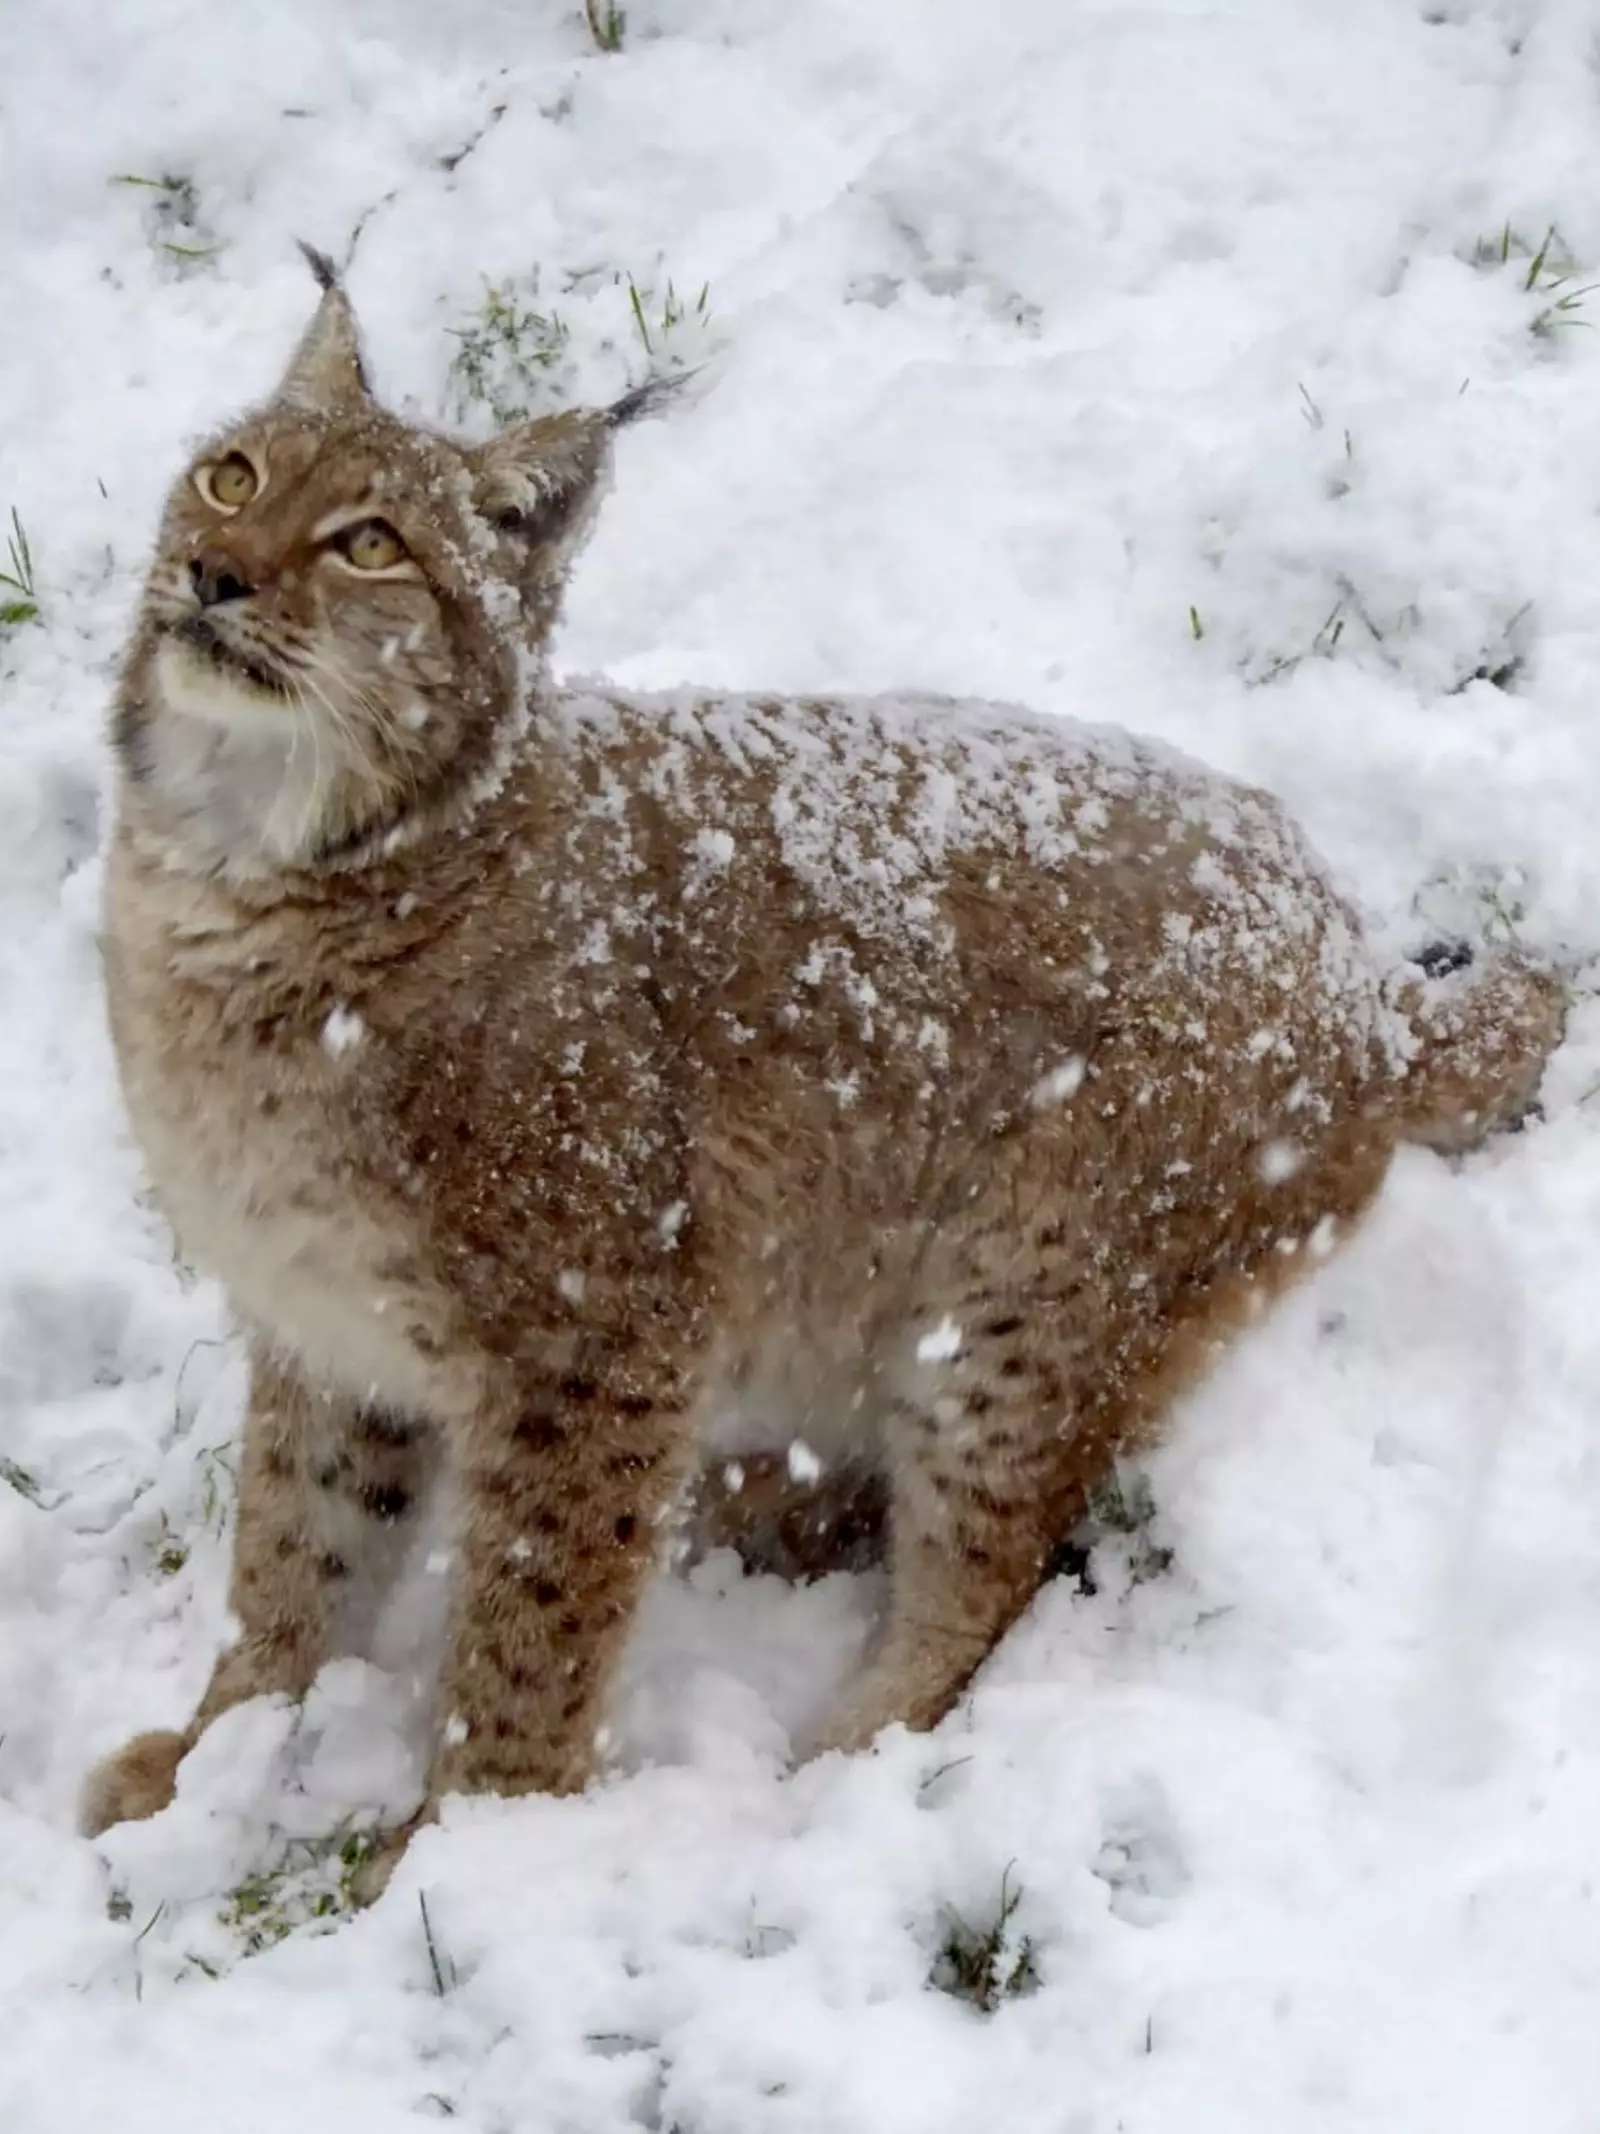 A lynx in the snow at Whipsnade Zoo